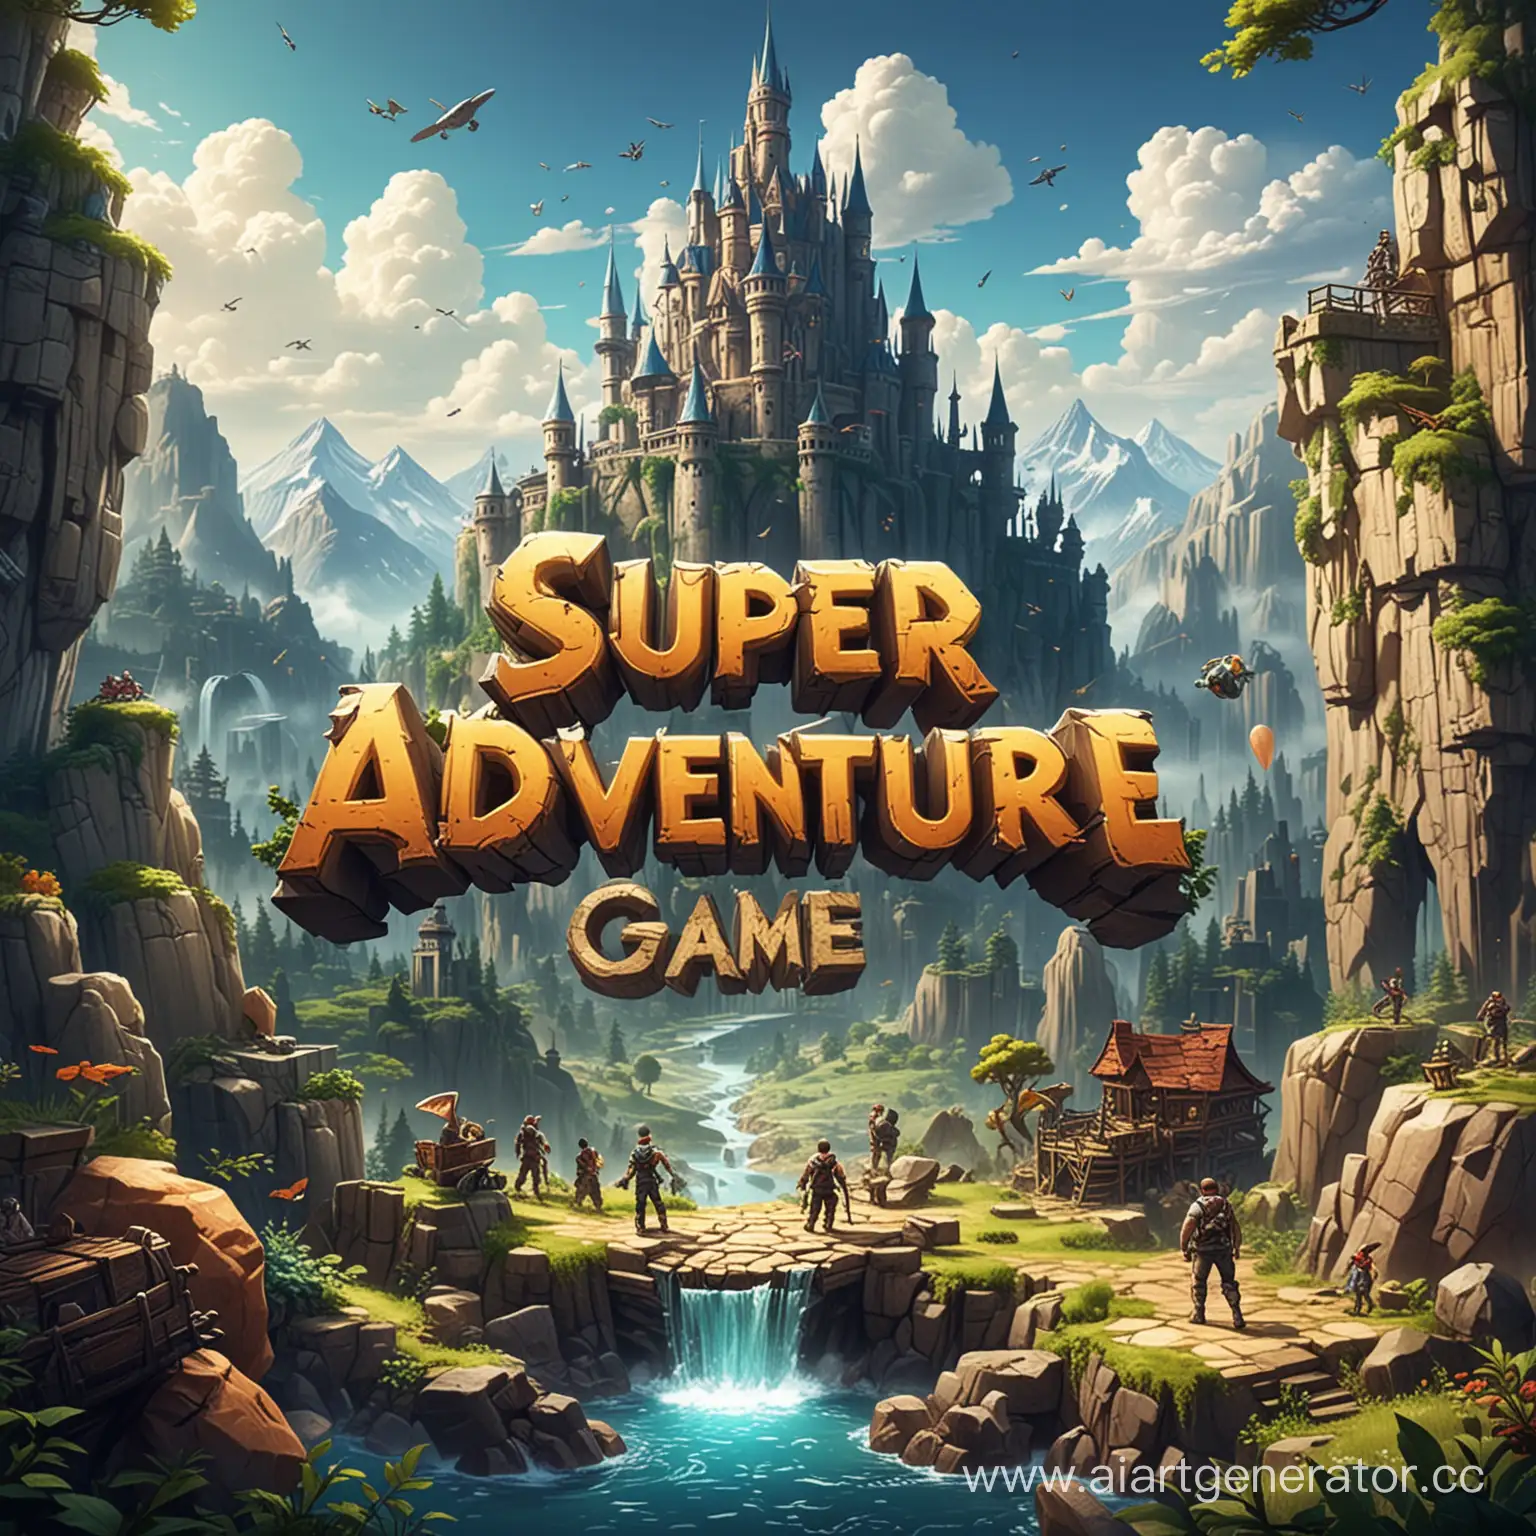 Exciting-Action-Adventure-Game-Super-Adventure-Game-with-Puzzles-and-Boss-Battles